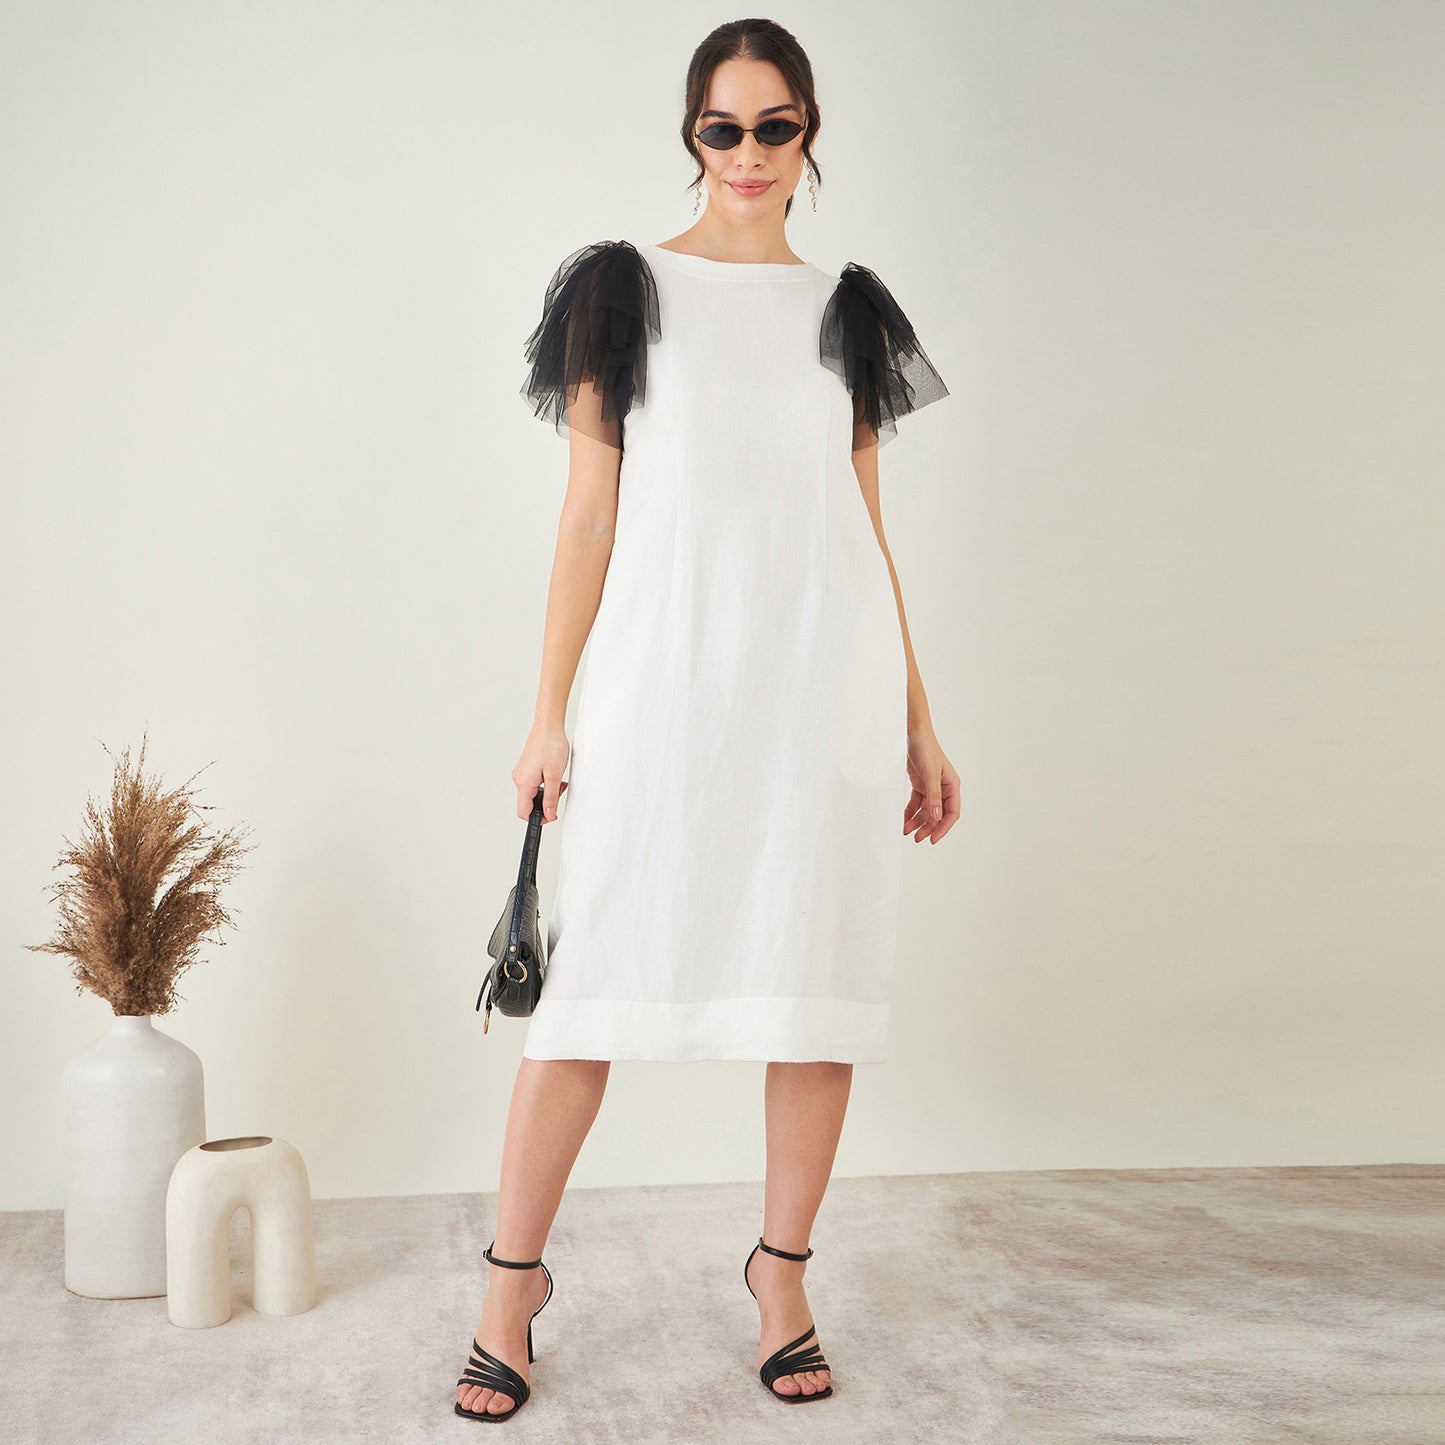 Off-White Linen Dress with Black Net Sleeves